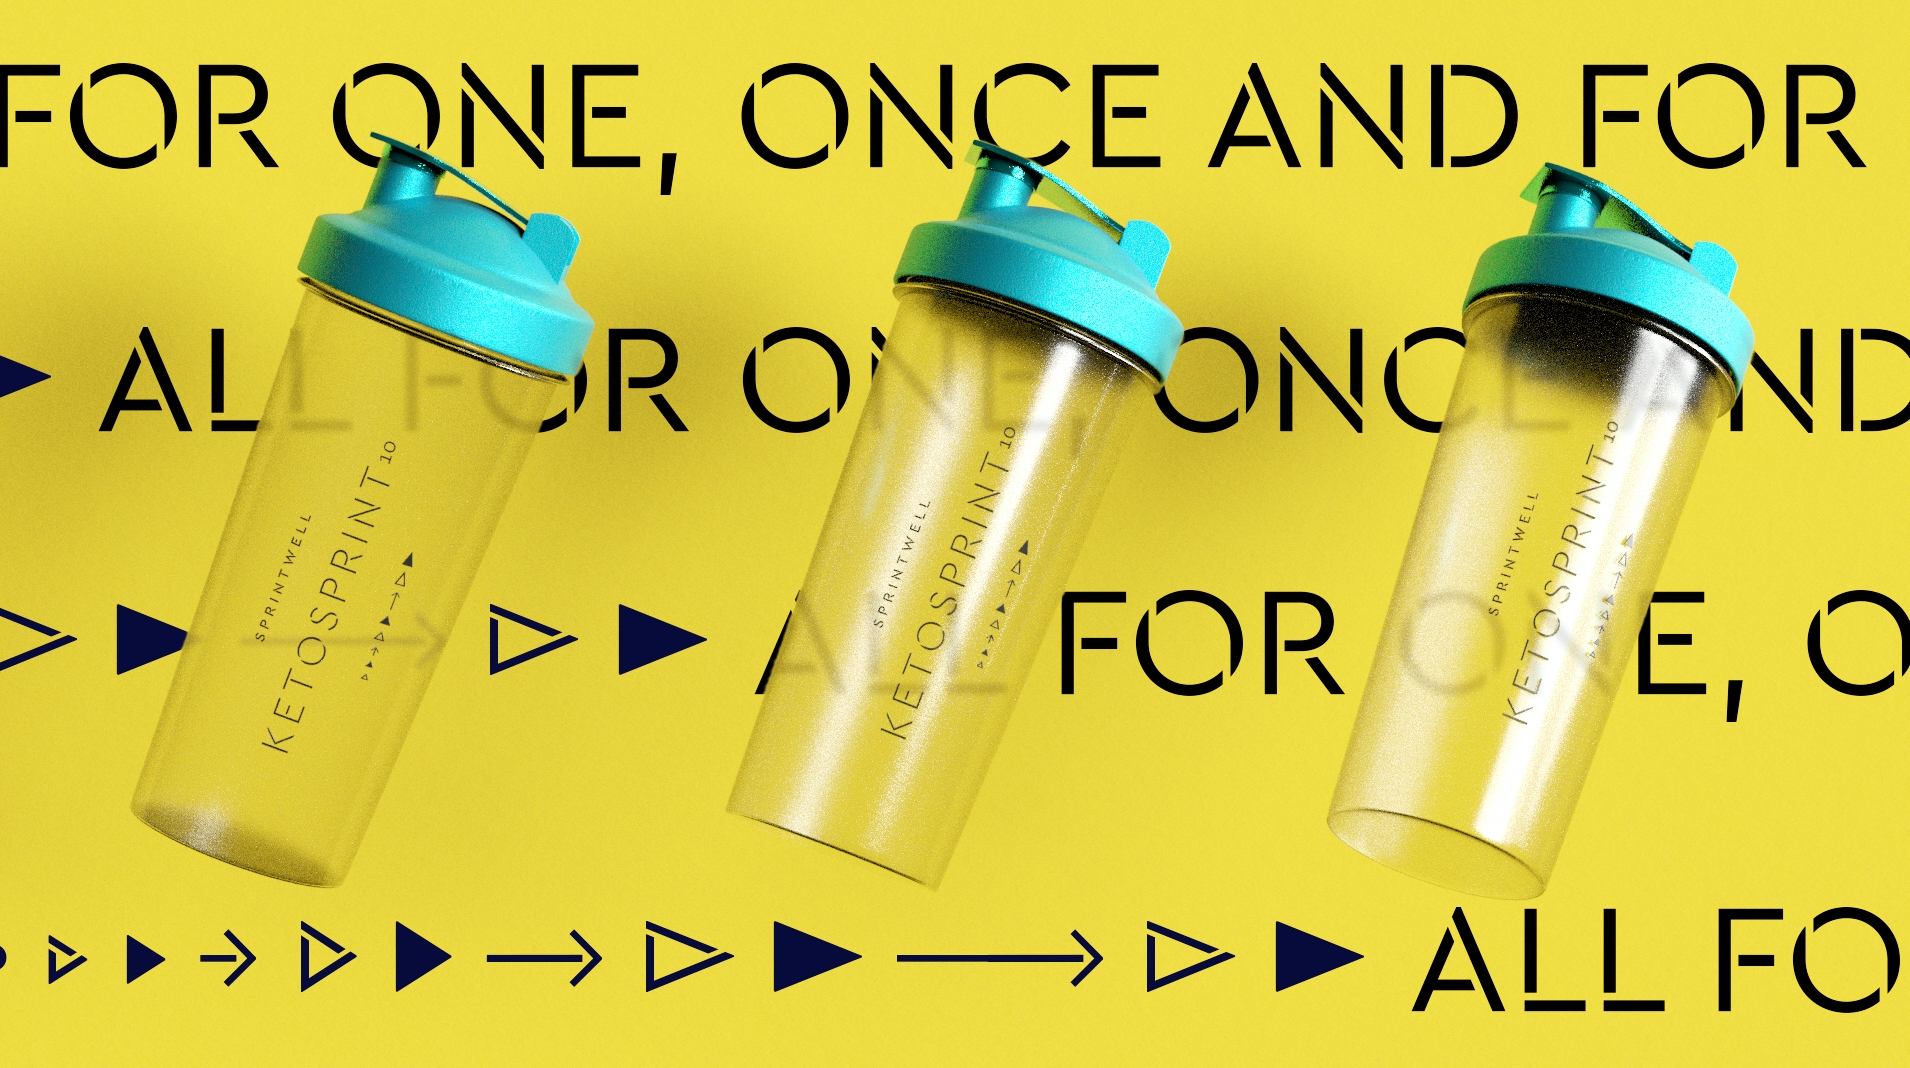 Three clear Sprintwell Ketosprint Keto protein shakers with turquoise lids sit on a yellow background with repeating text “All for one, once and for all” and iconography.